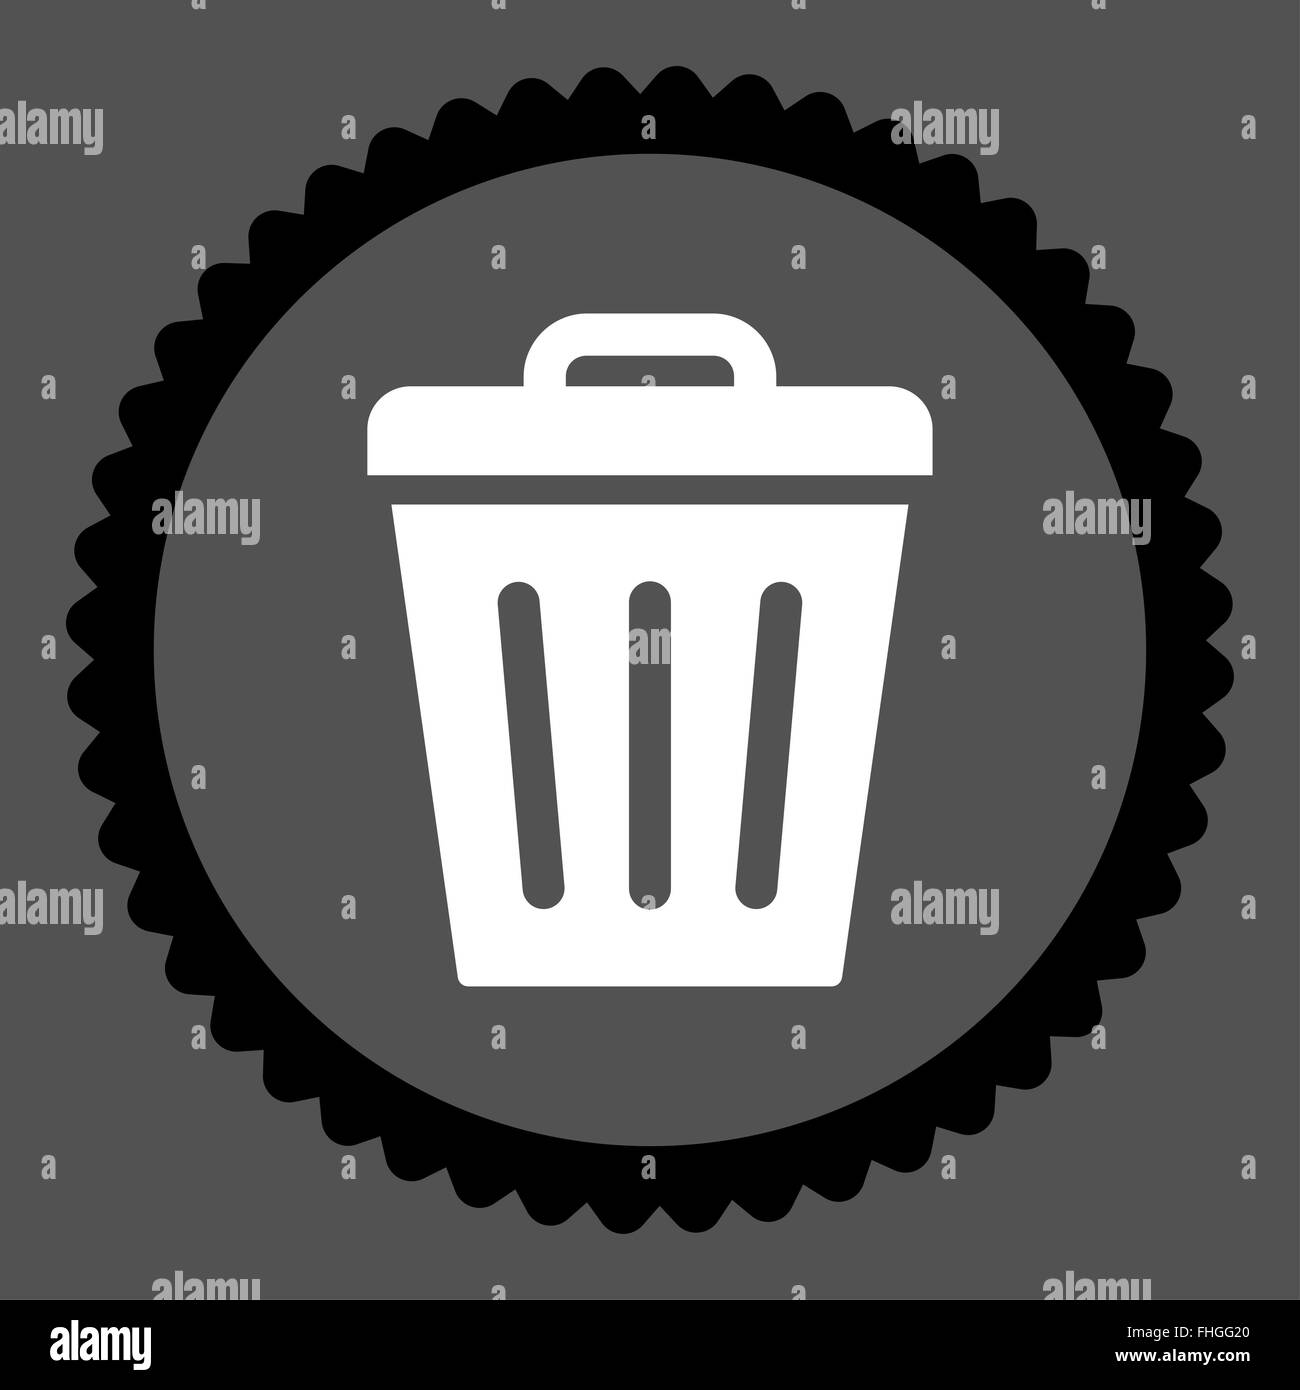 Trash Can flat black and white colors round stamp icon Stock Photo